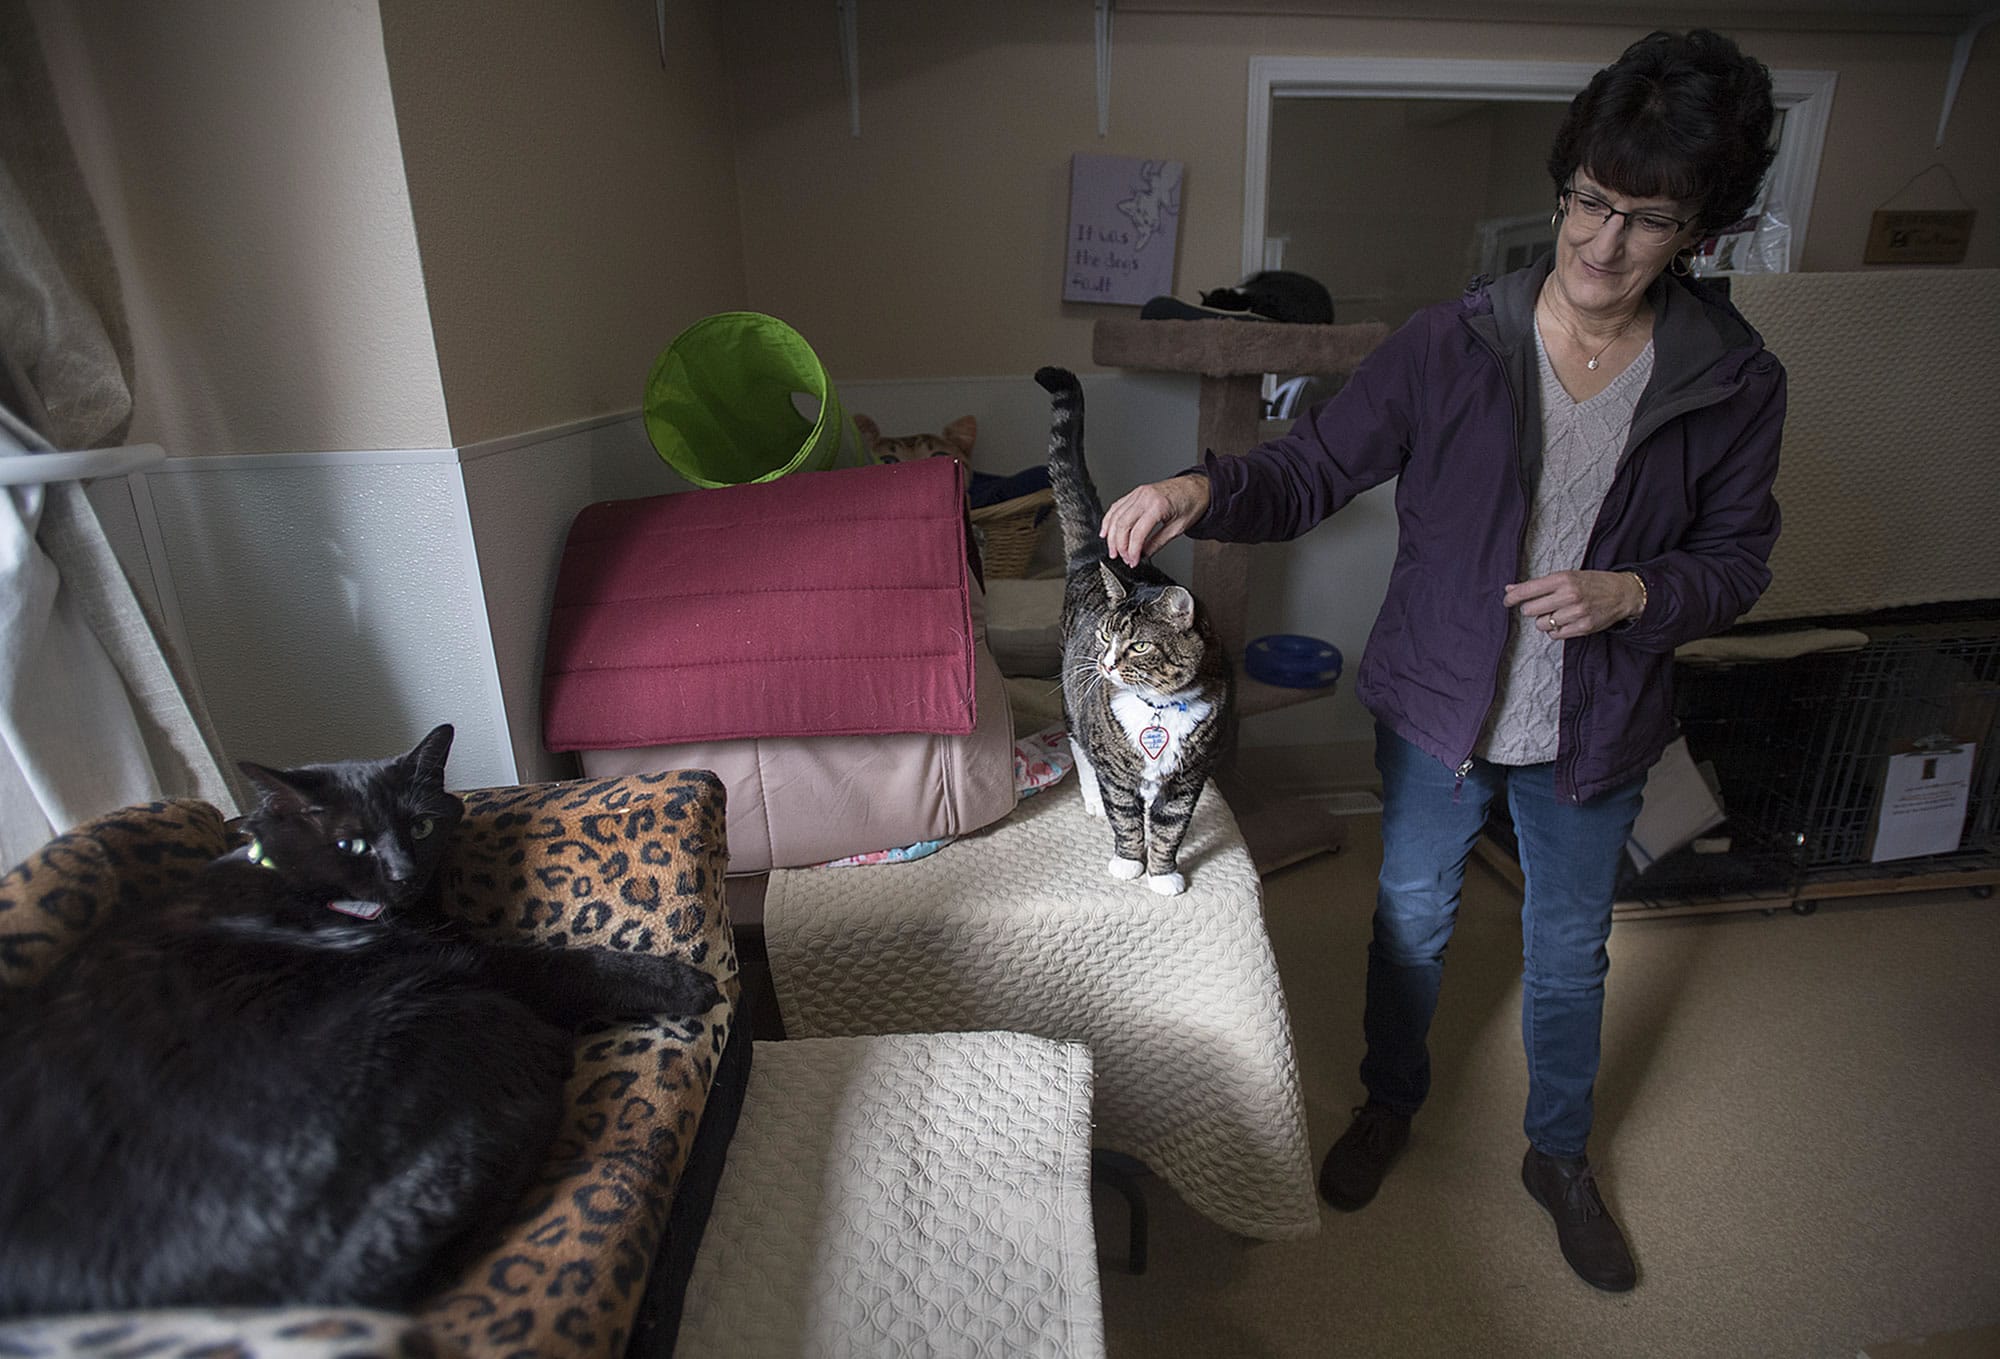 Volunteer Joan Ellis shares a moment with Venice, 2, center, who is available for adoption, at the West Columbia Gorge Humane Society cat shelter in Washougal late Tuesday morning. Also pictured relaxing in the cat shelter is Torr, 3, left, who is hoping for a forever family as well.